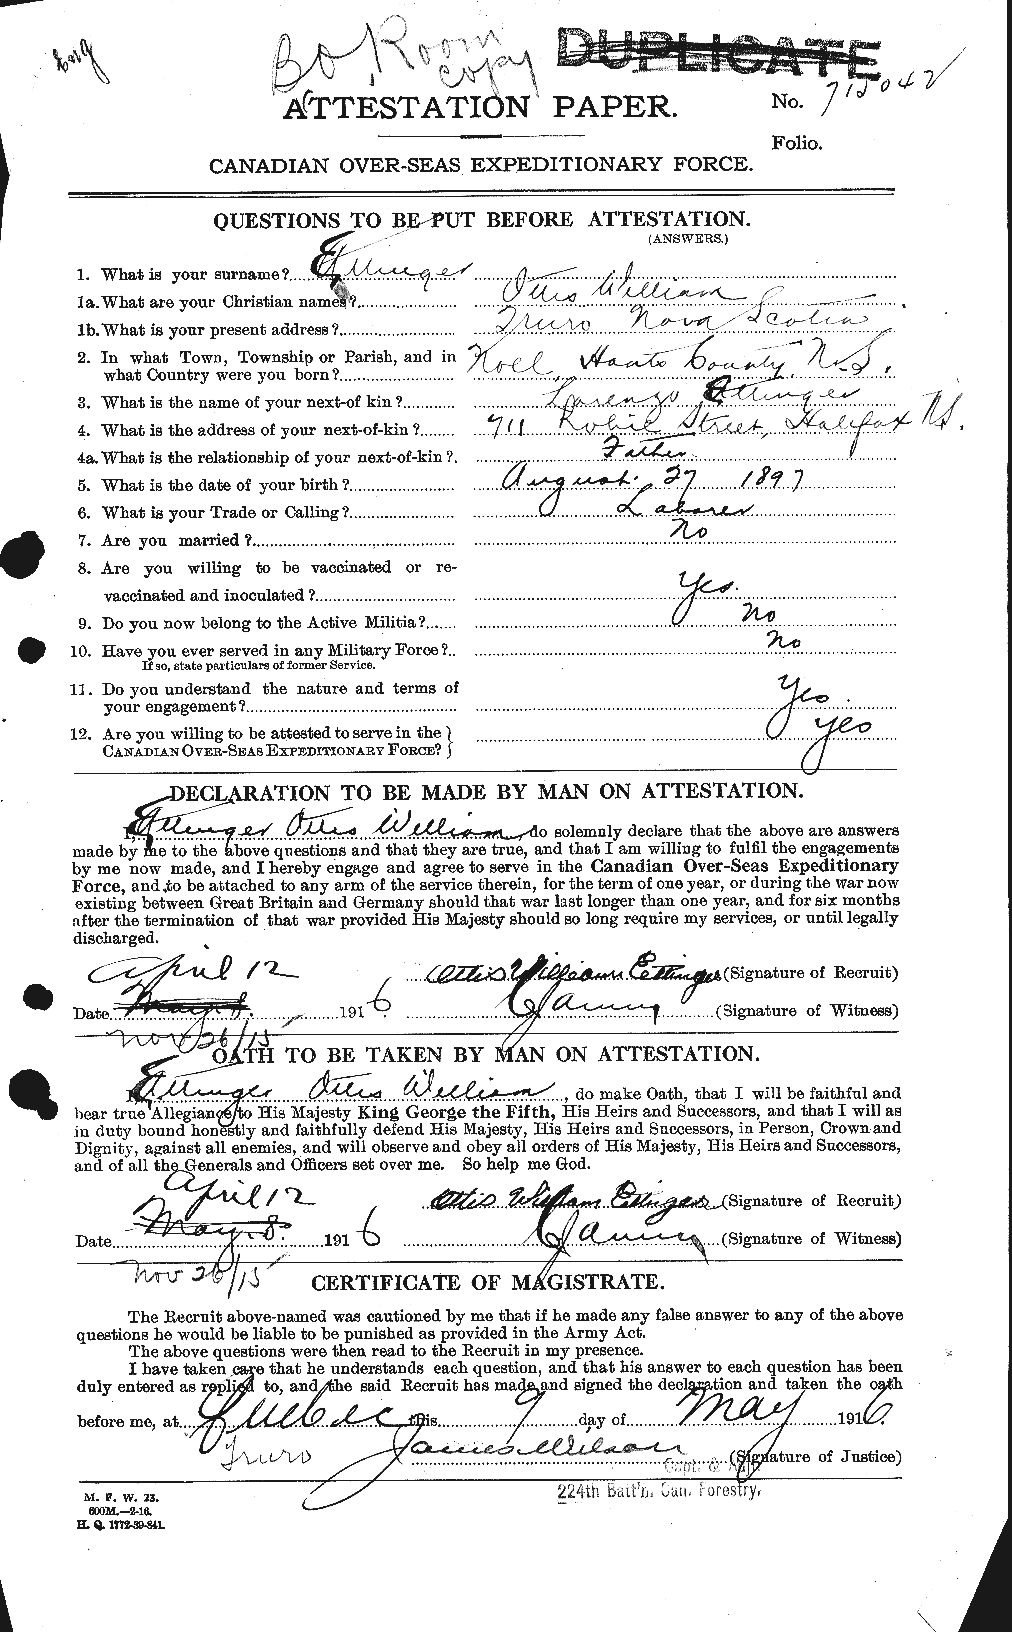 Personnel Records of the First World War - CEF 314773a